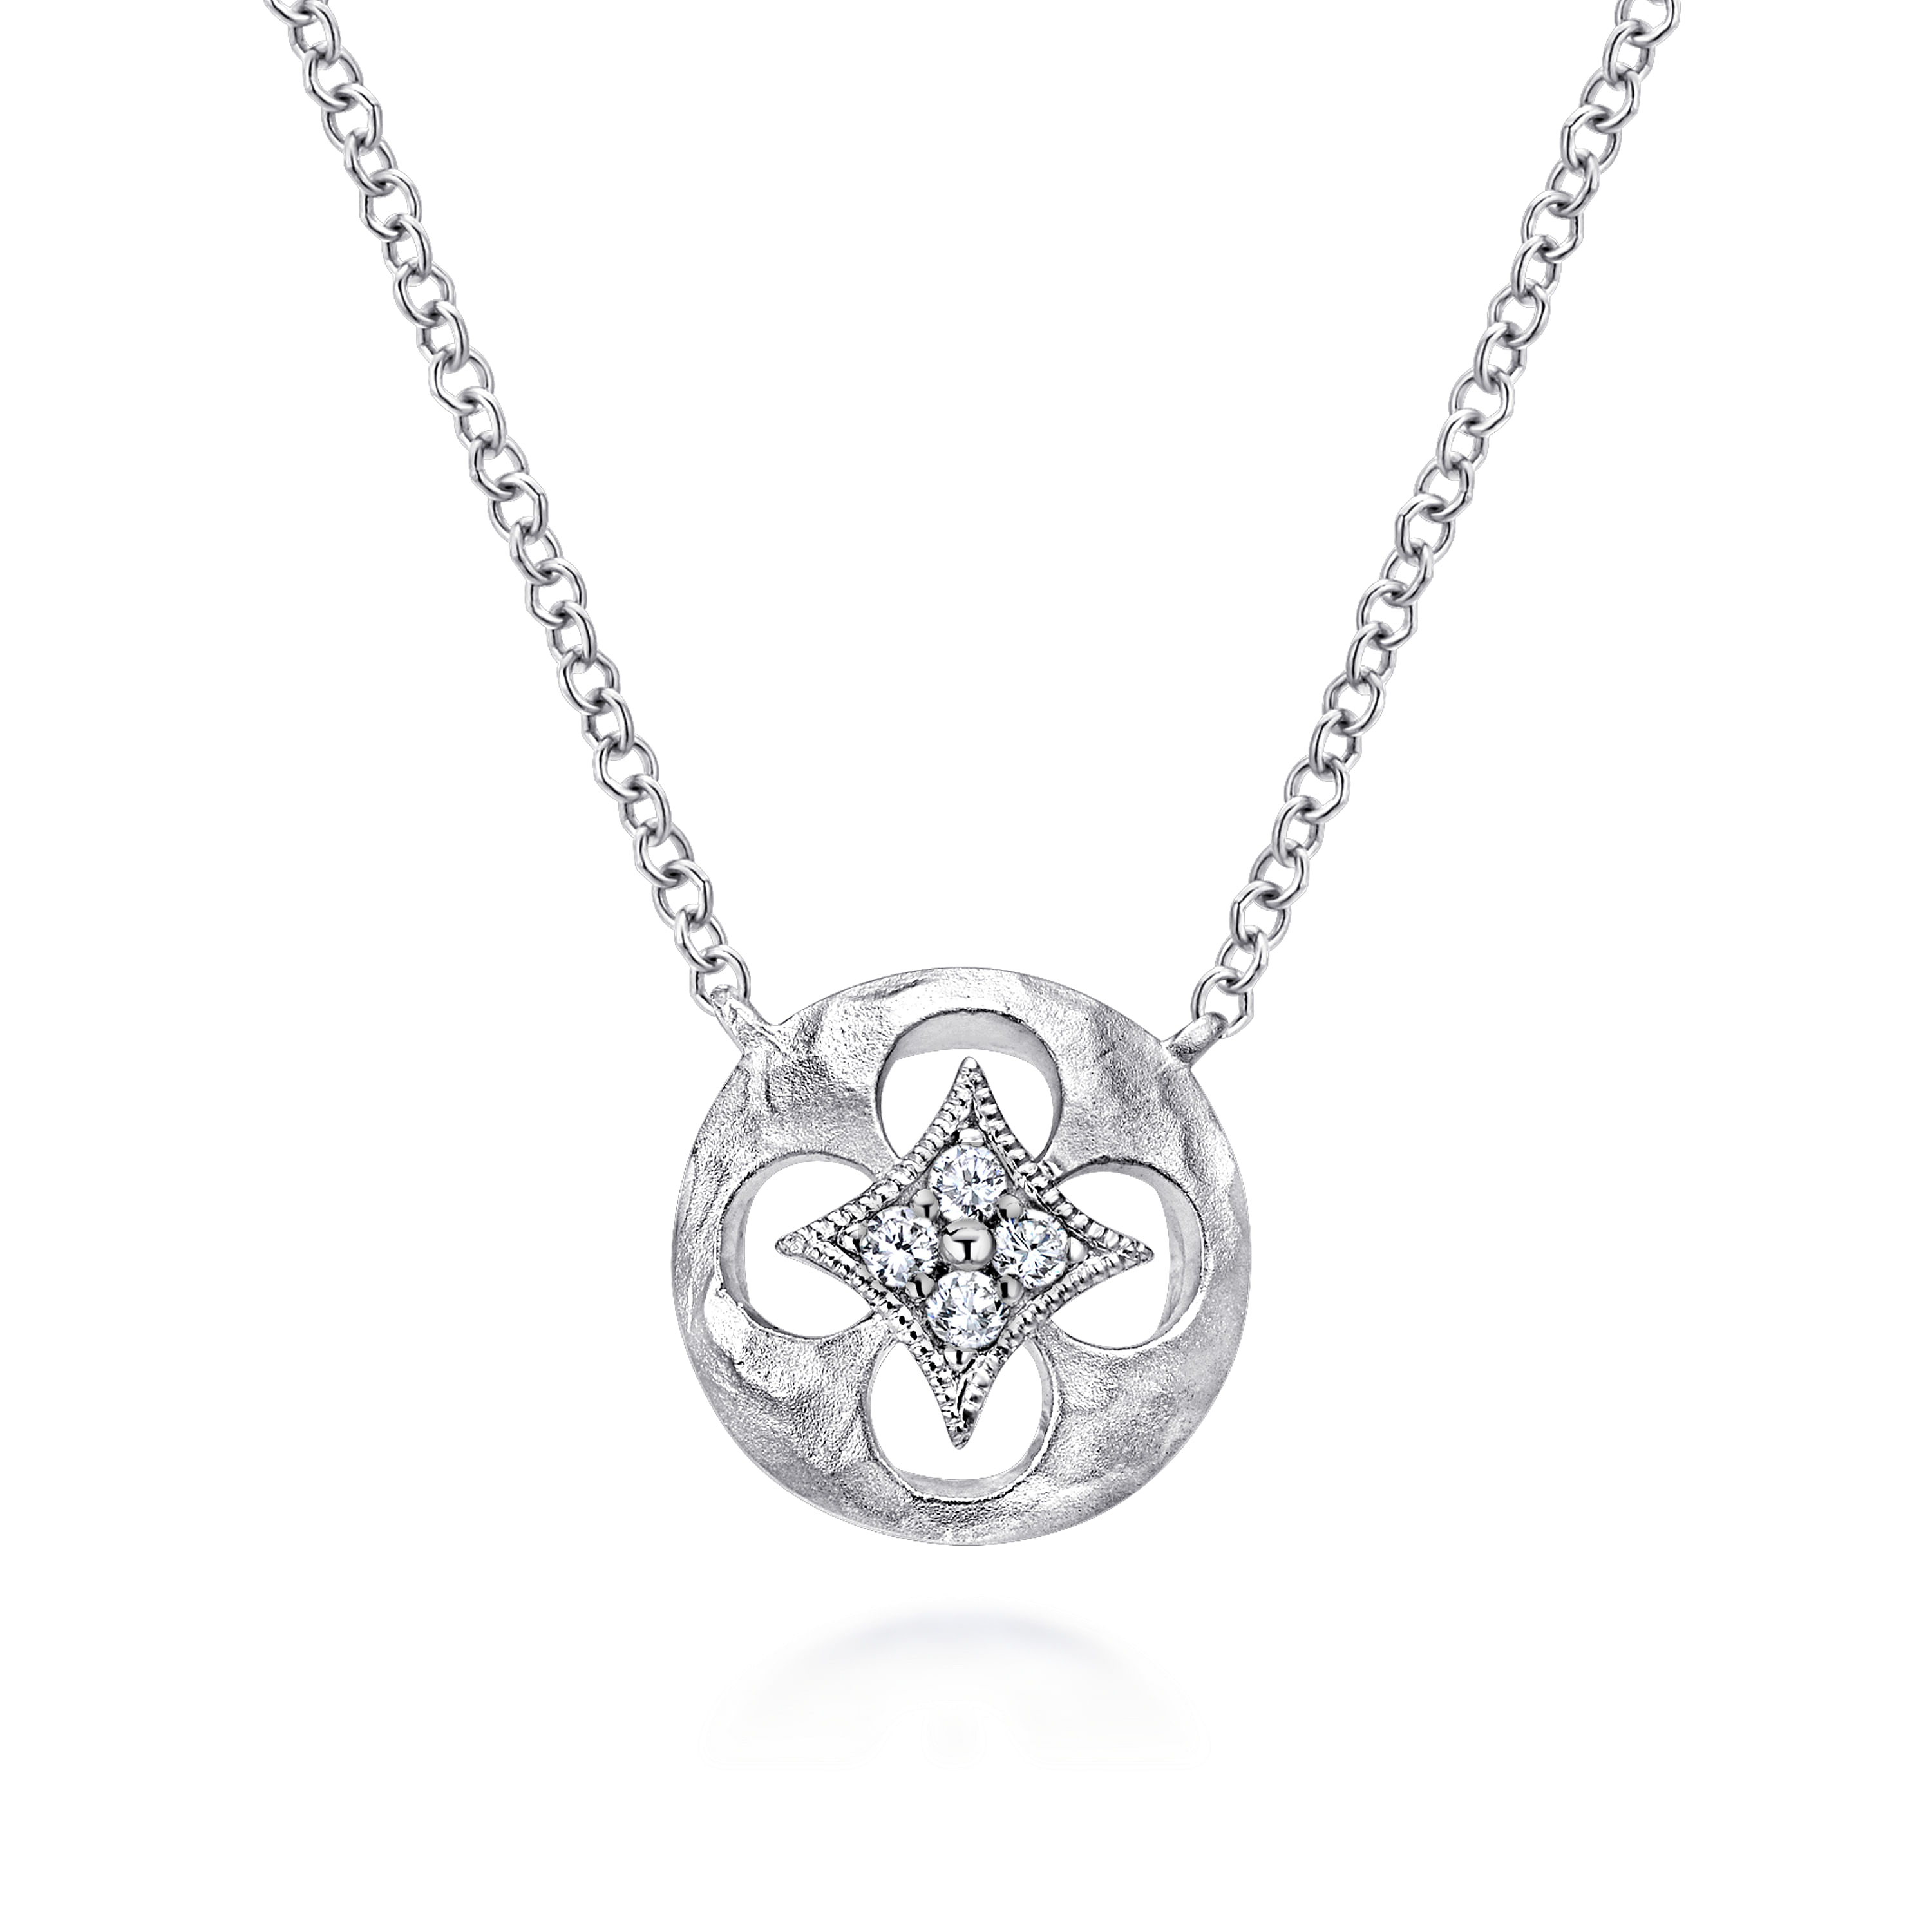 18 inch 925 Sterling Silver Round Quatrefoil Cutout Pendant Necklace with Diamonds